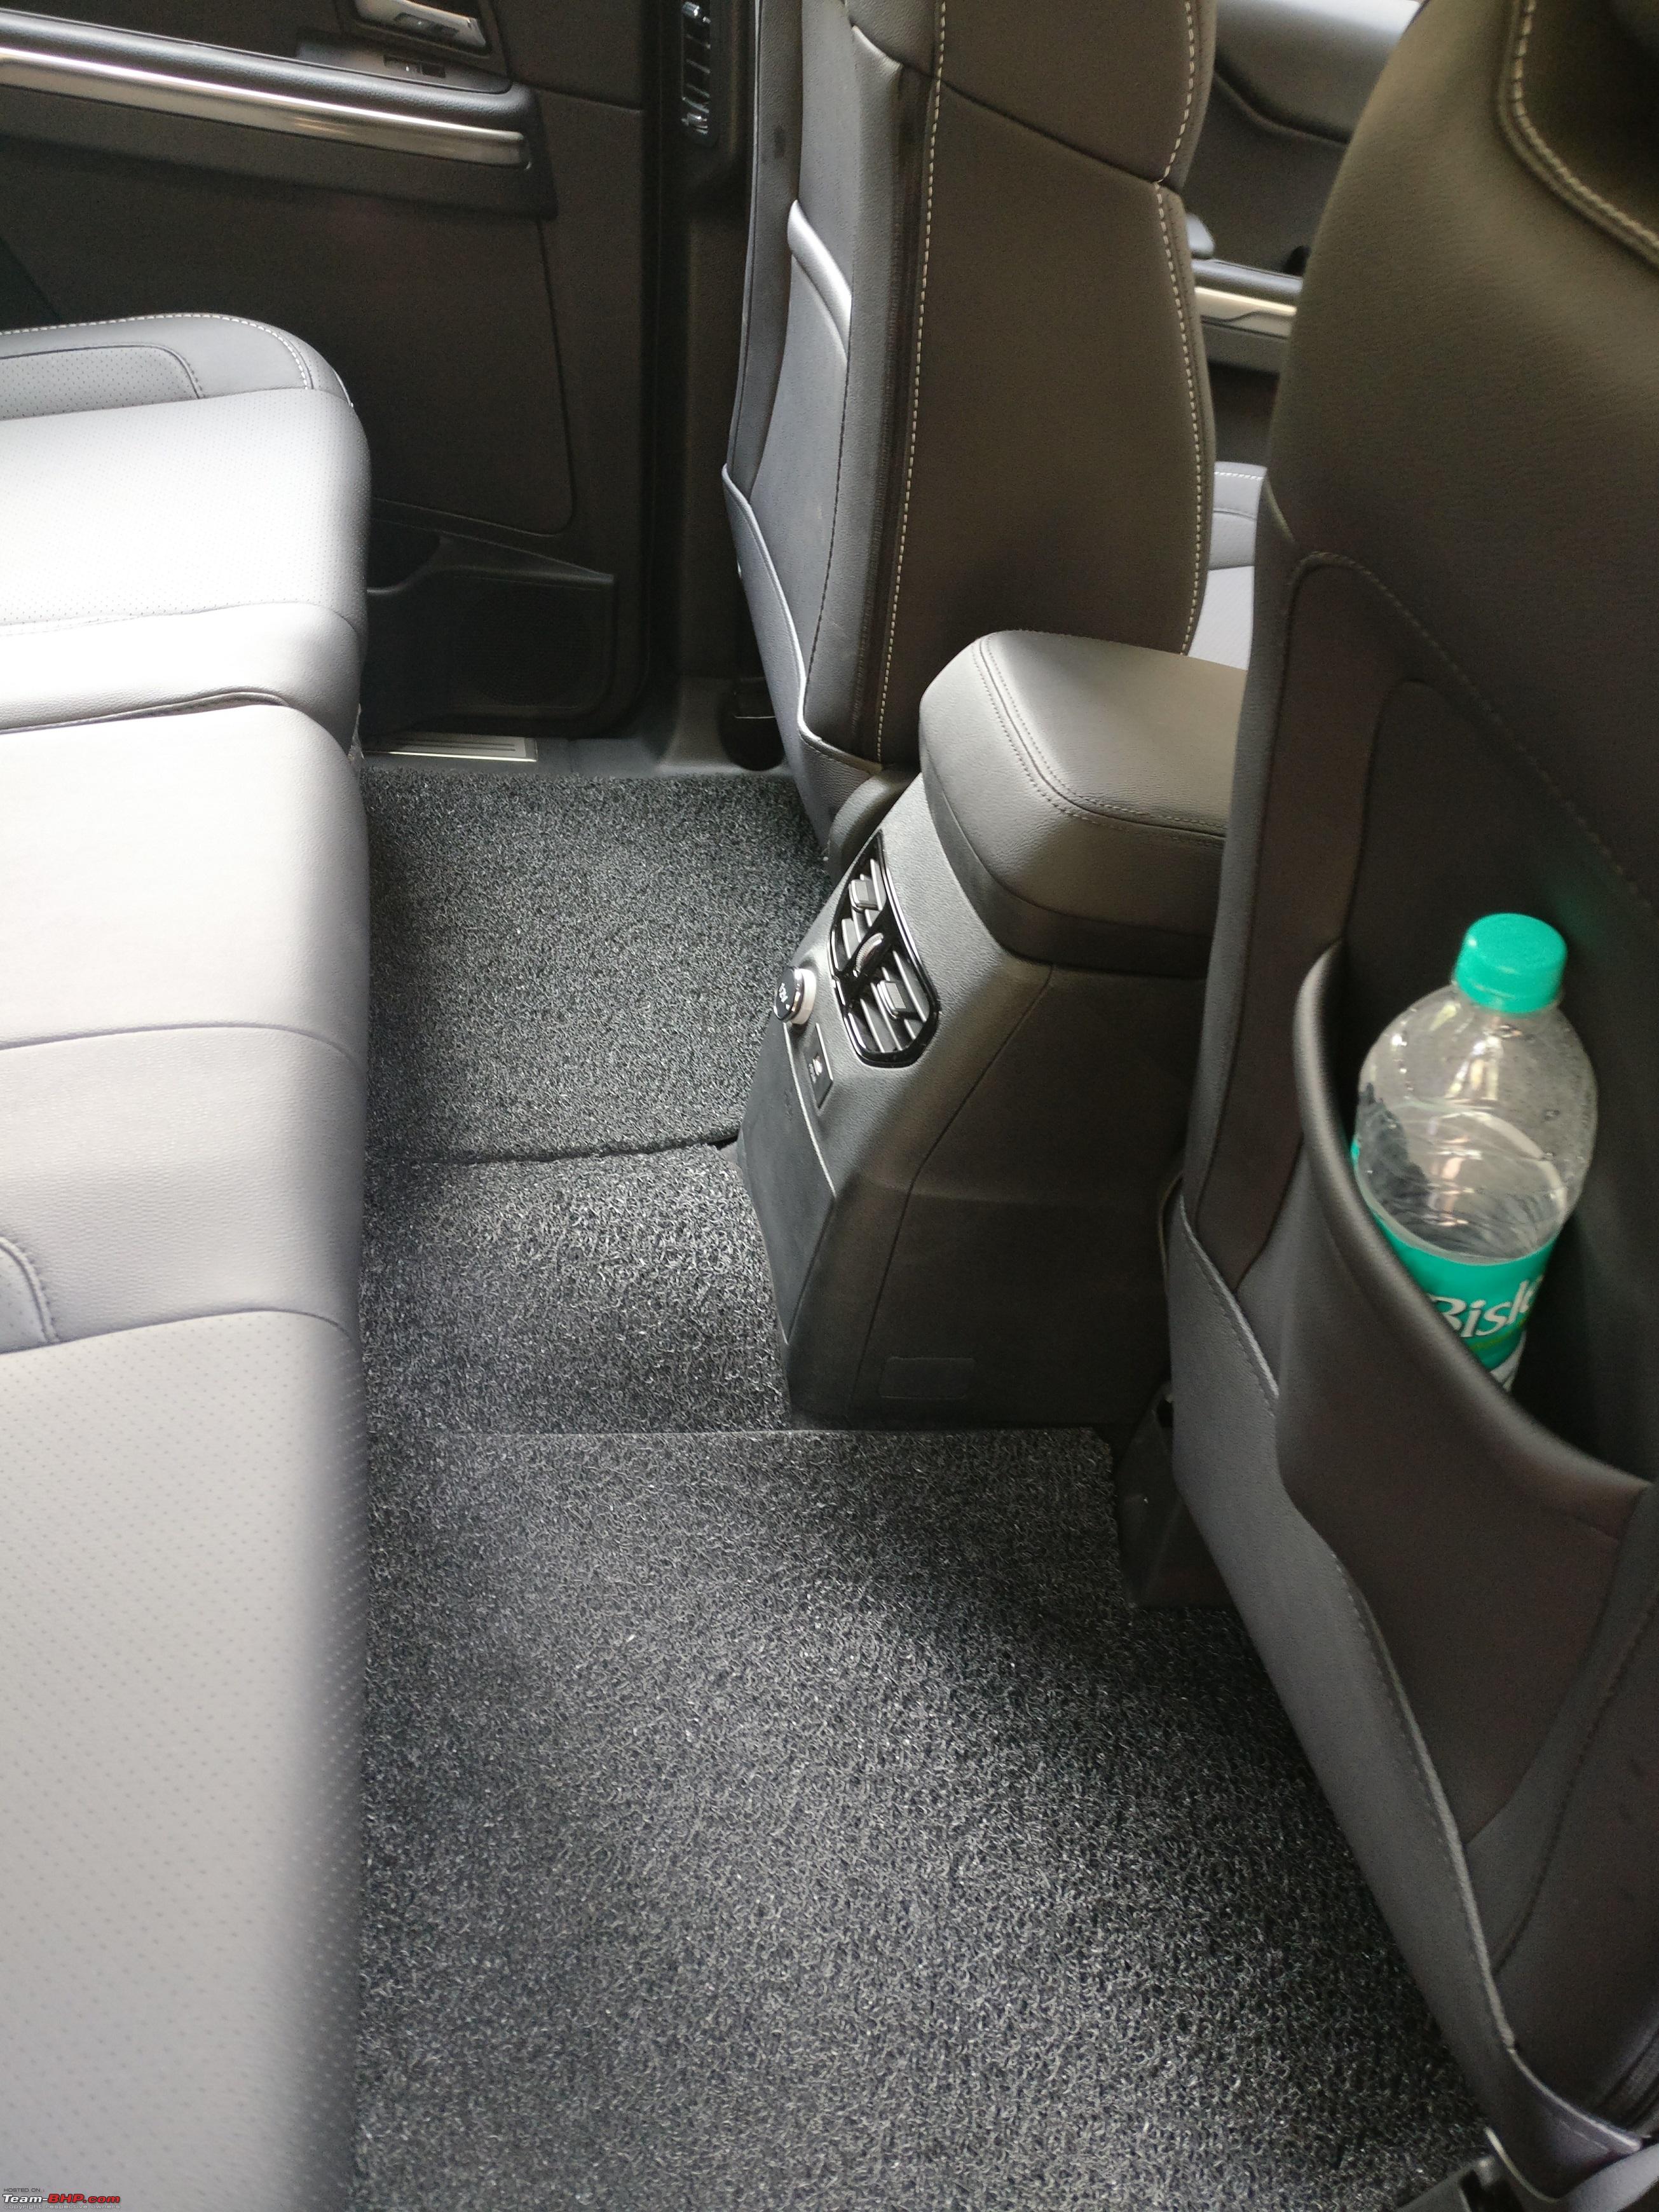 3M Nomad Foot Mats : Product Review - Page 6 - Team-BHP